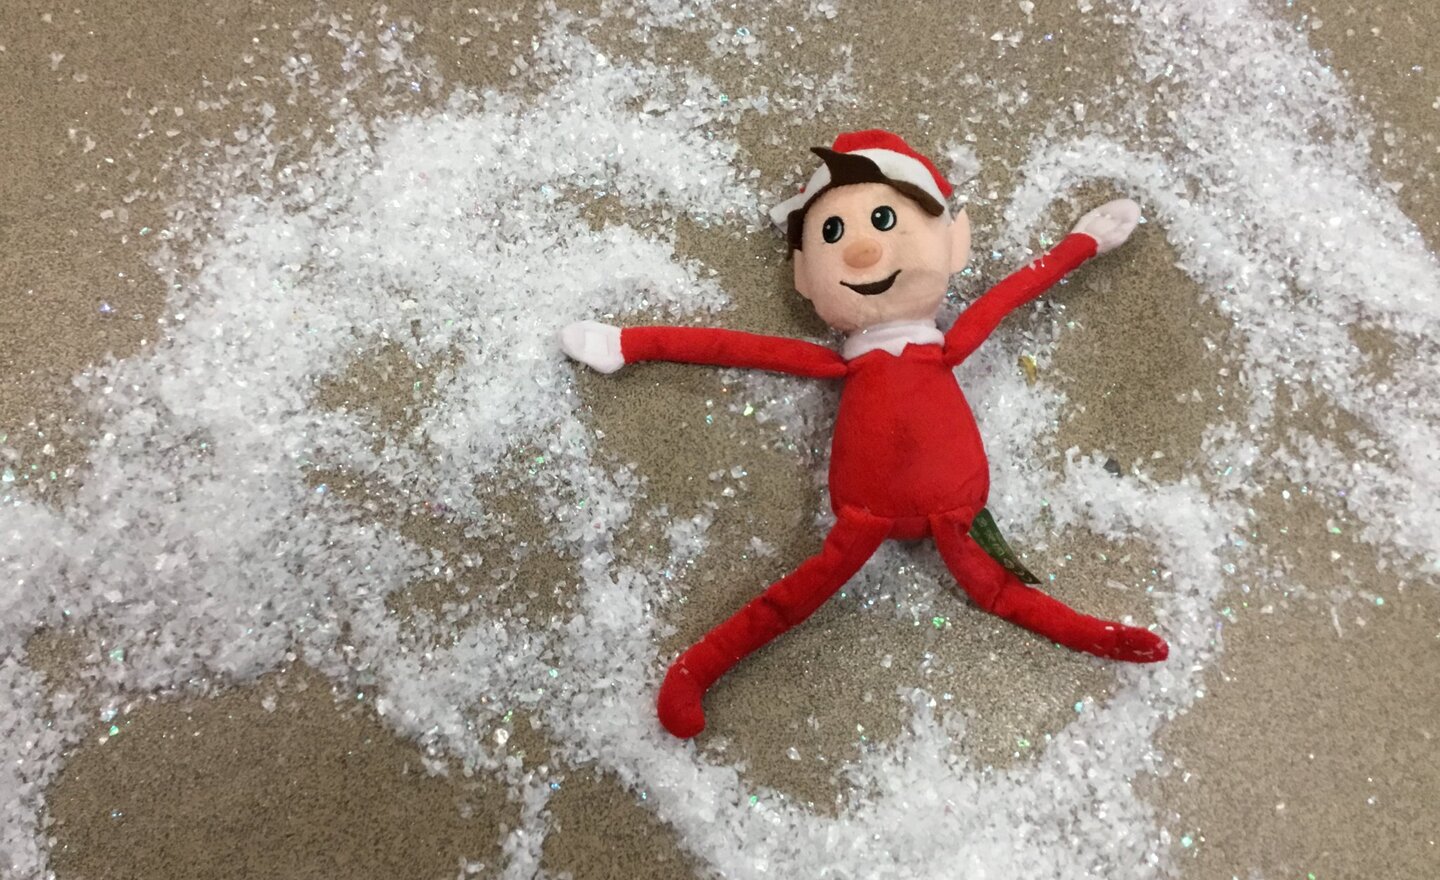 Image of The Elf’s snow angels